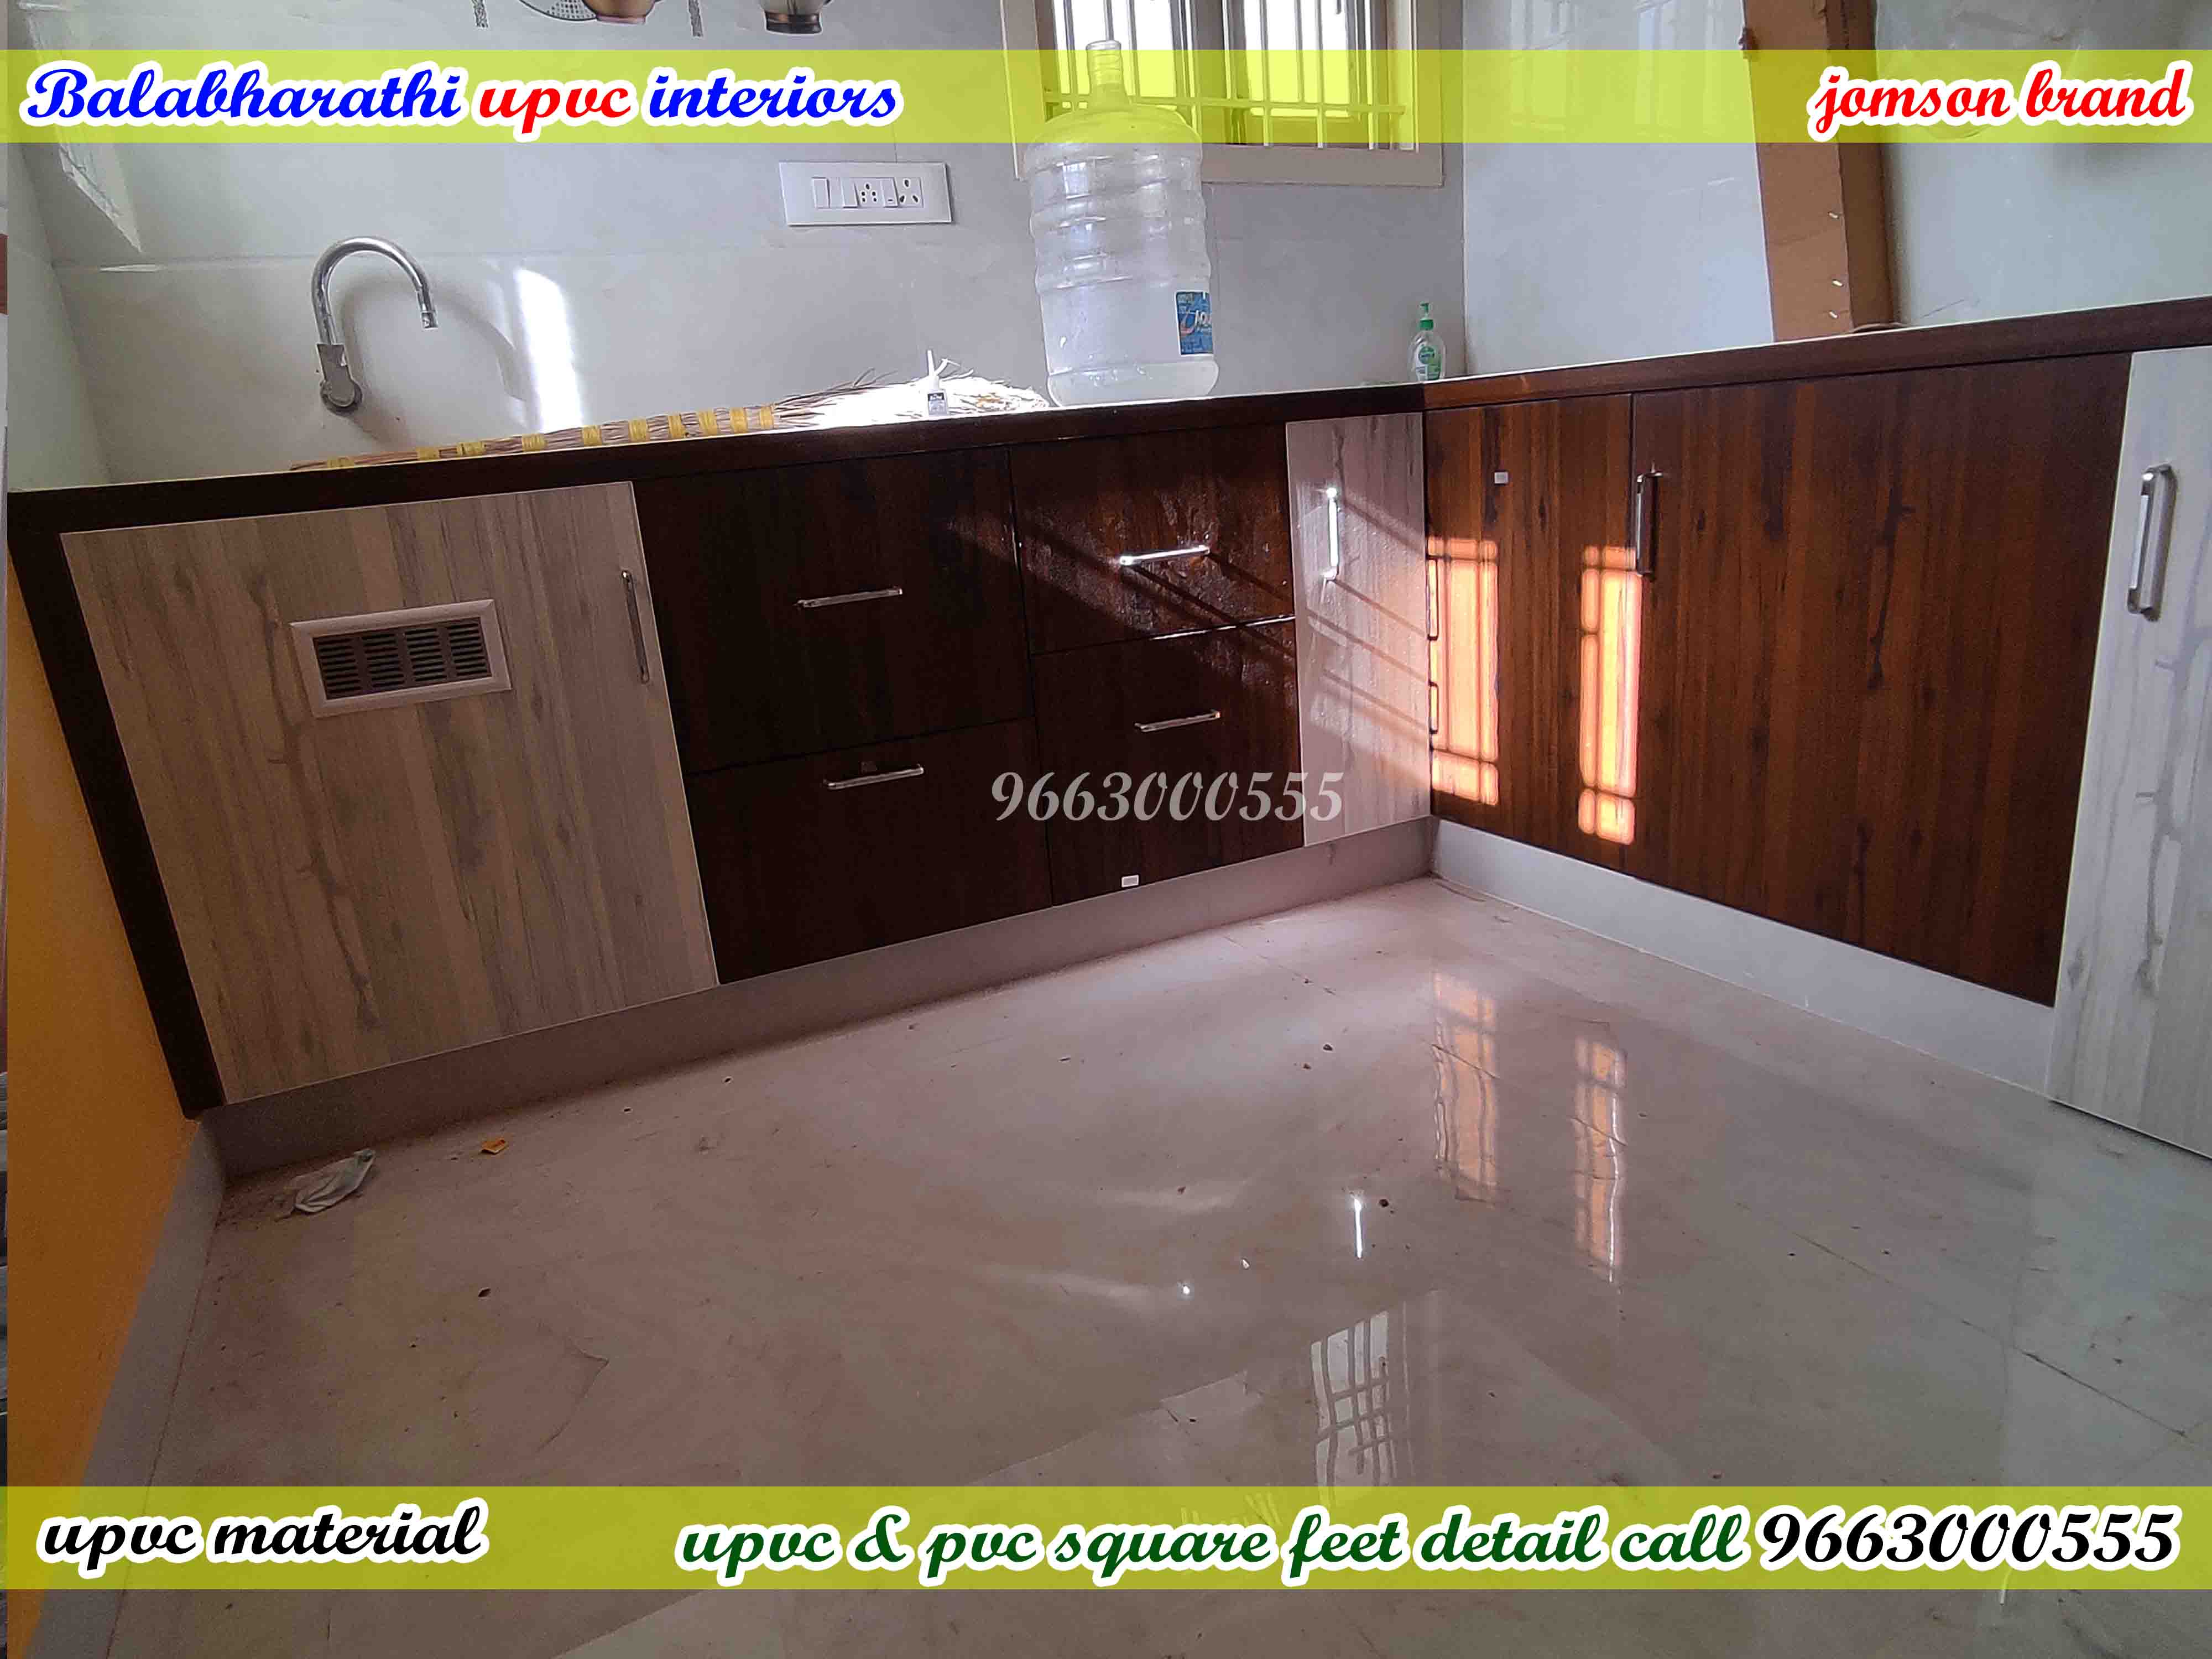 upvc wood color kitchen cabinets